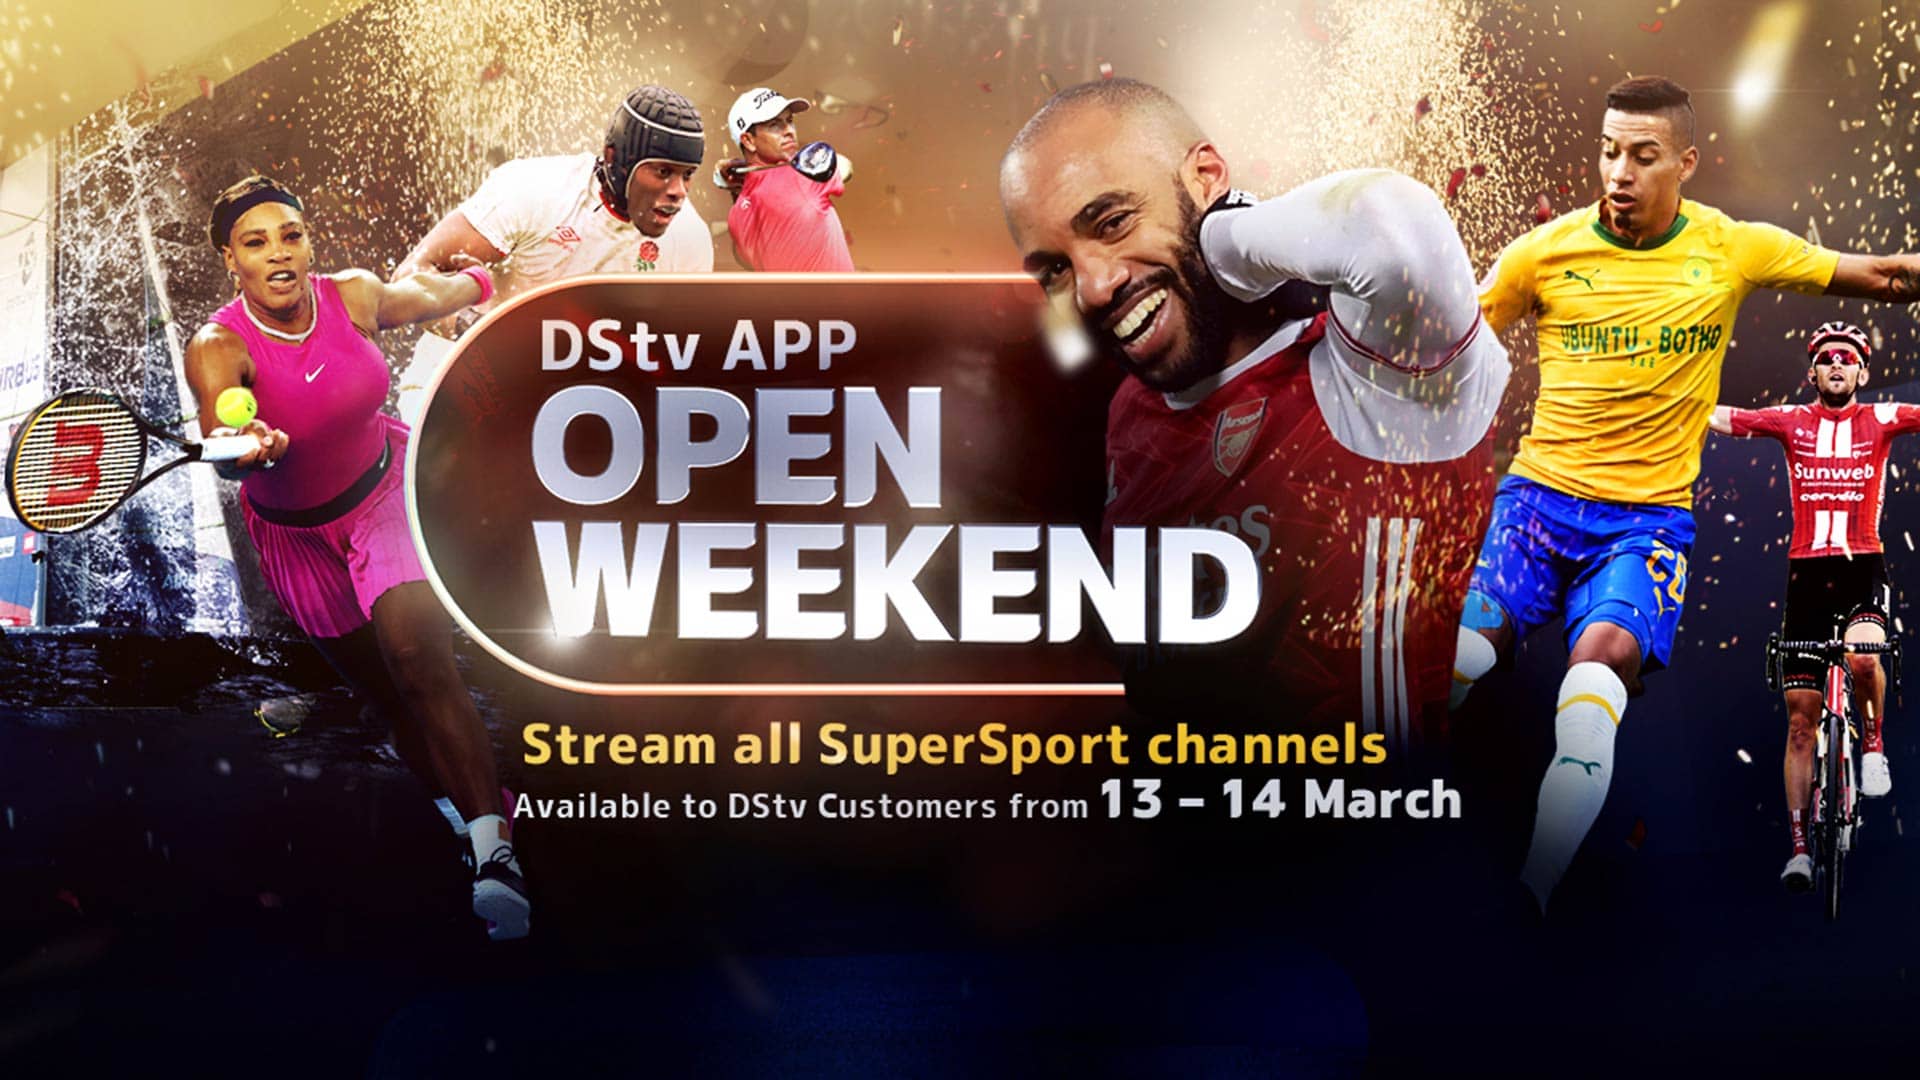 Watch all of SuperSport for one weekend only on the DStv app